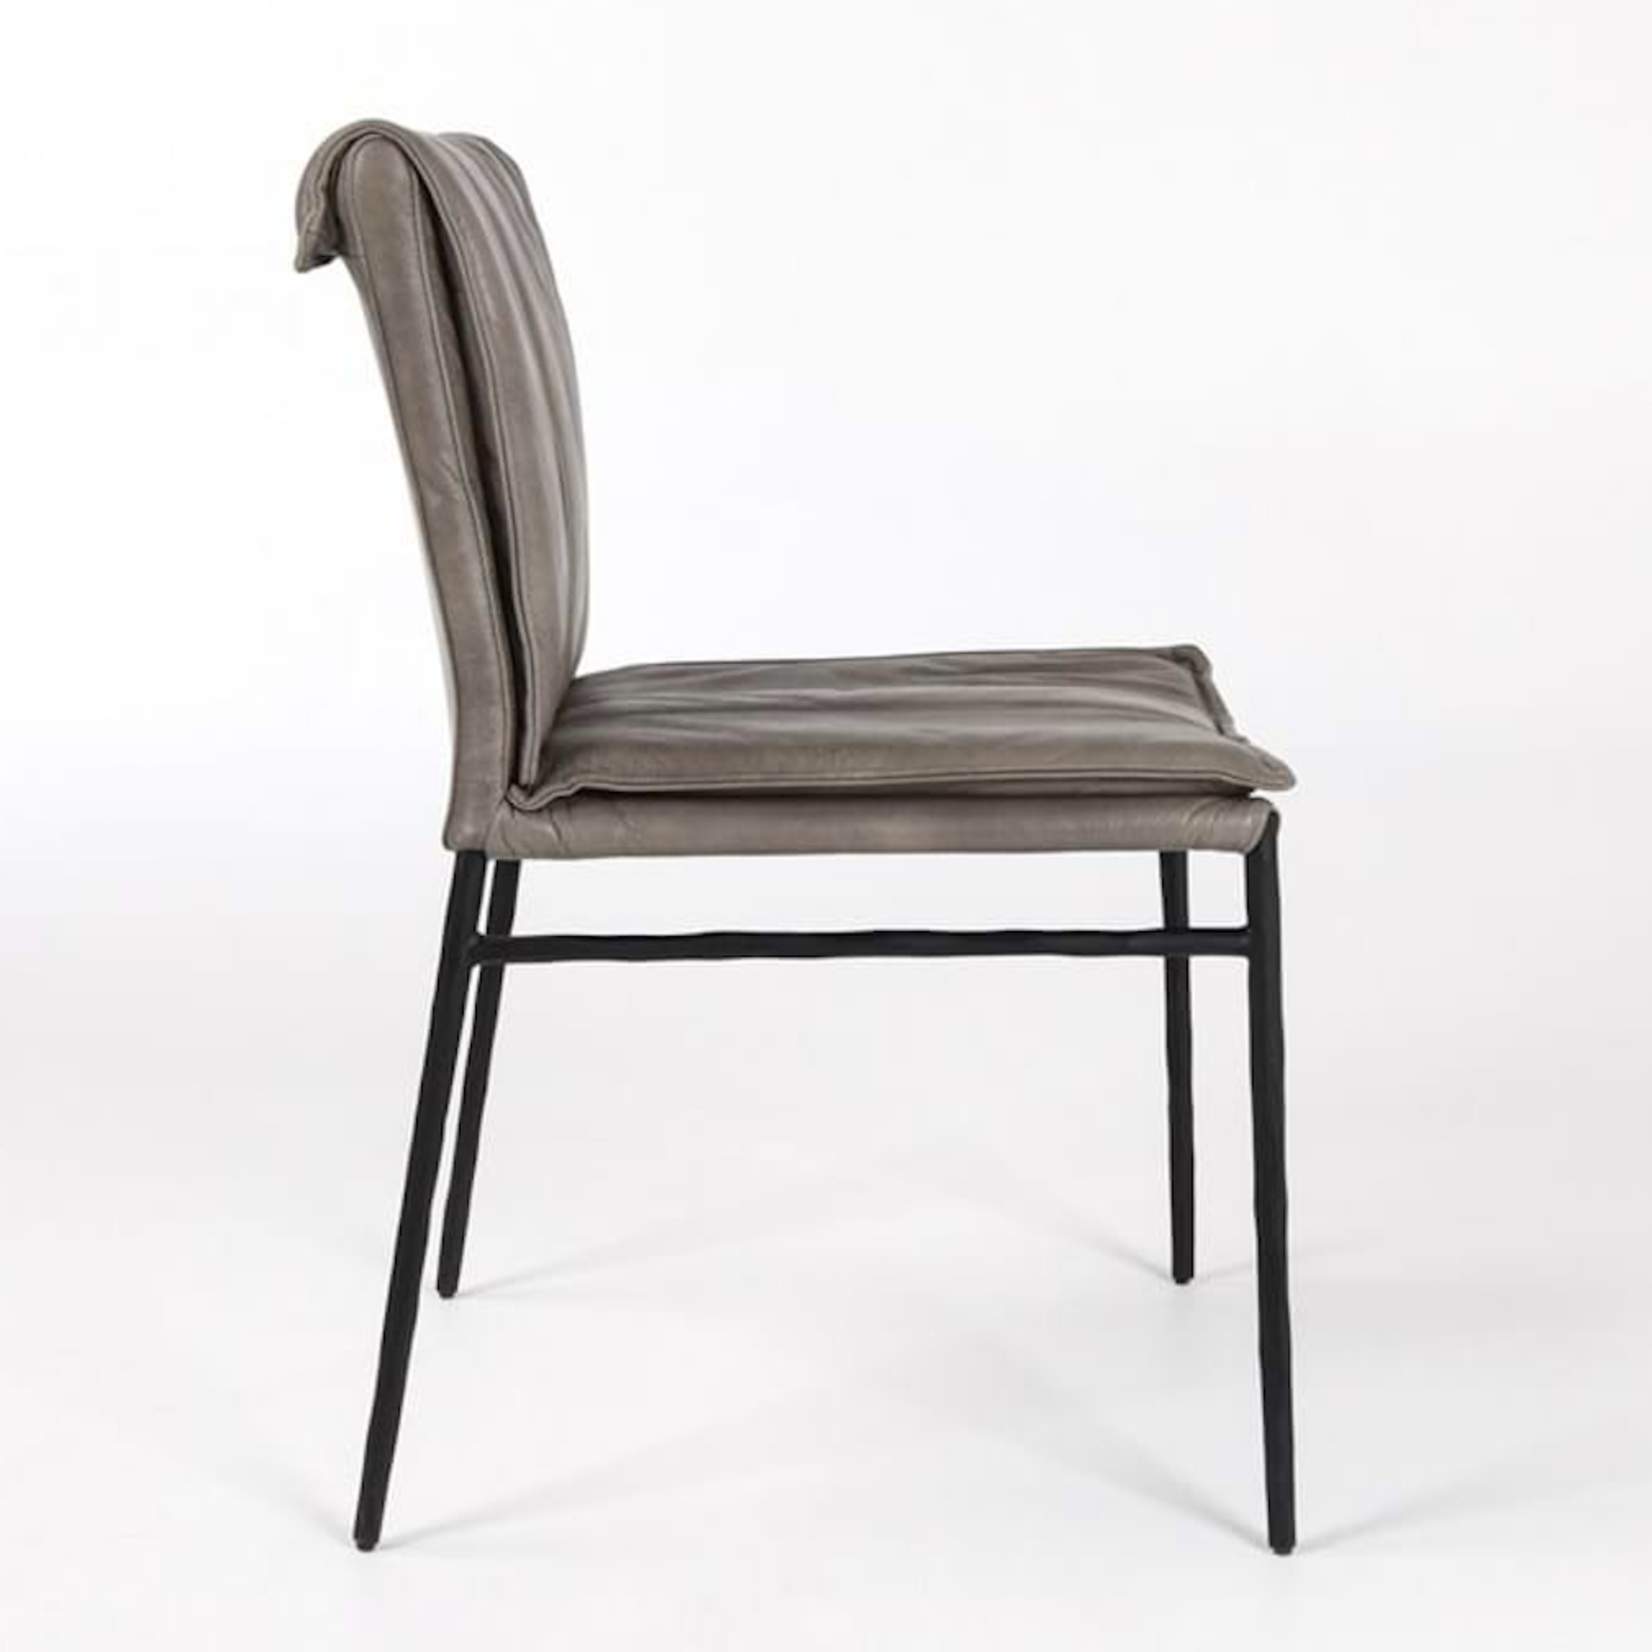 Outside The Box Mayer Gray Top Grain Leather Dining Chair